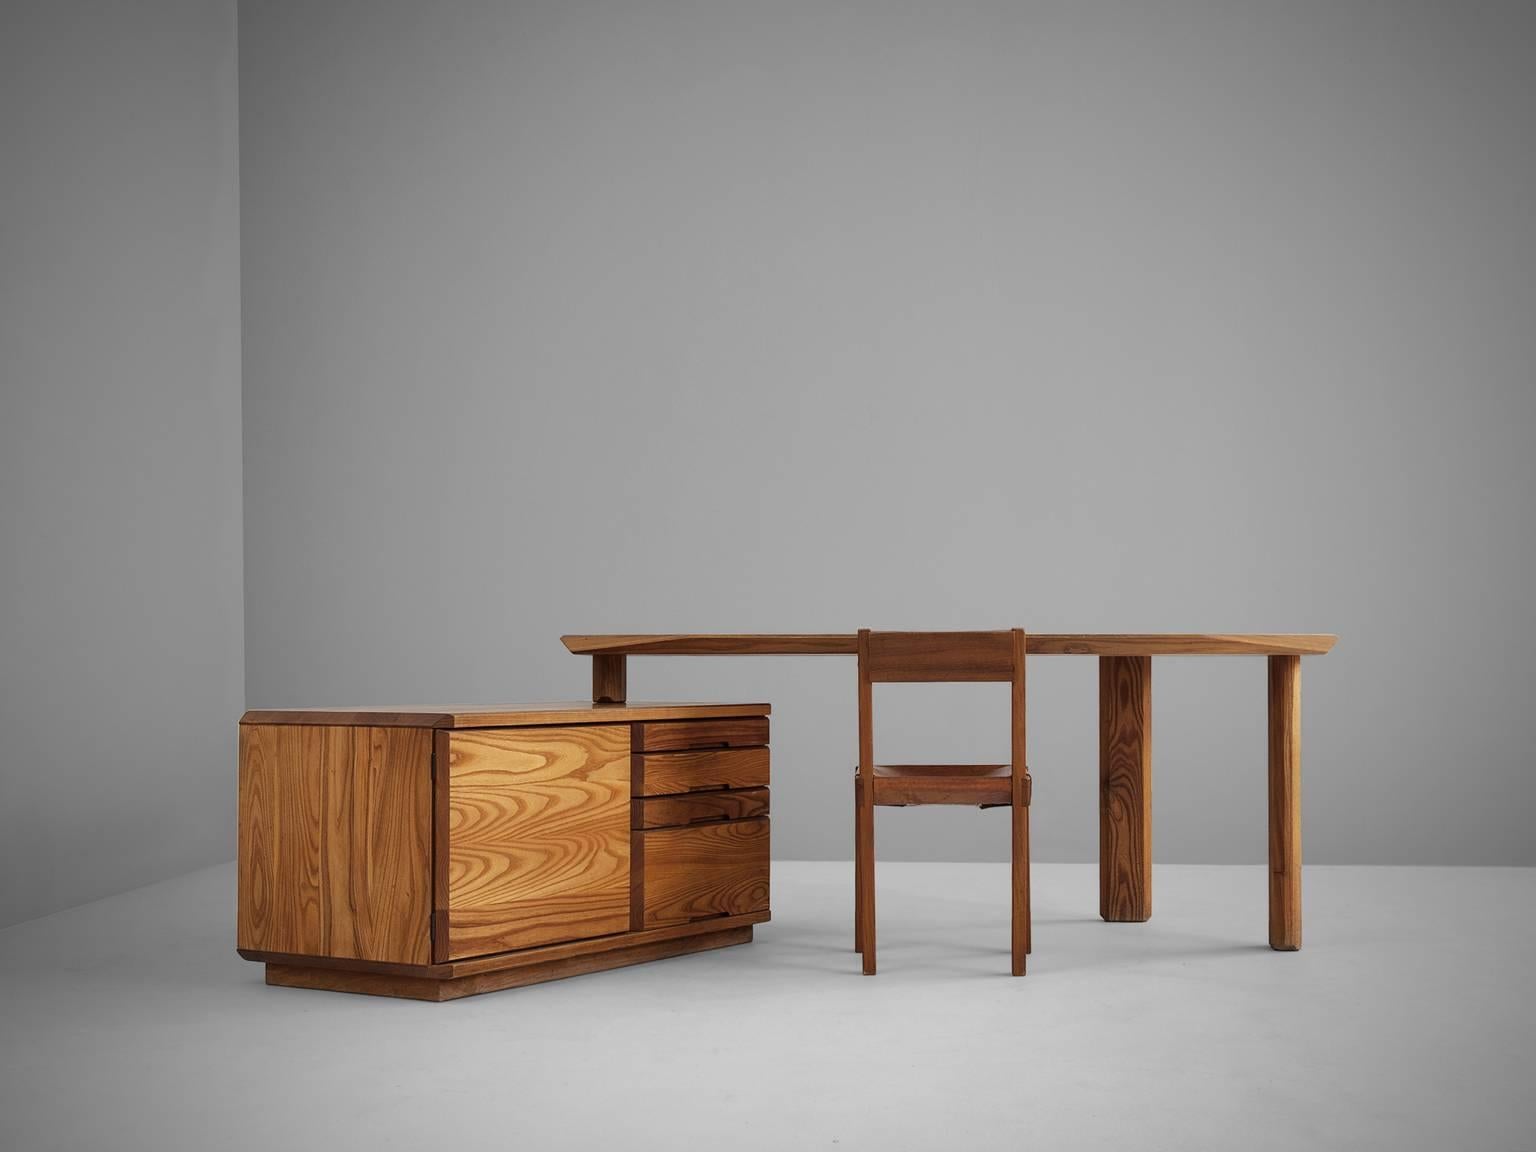 Pierre Chapo, adjustable desk B40, elm, France, 1960s.

Characteristic desk by French designer and carpenter Pierre Chapo. Eye-catching detail is the beautiful and expressive grain of the elmwood, visible on the entire item. Stunning polygonal